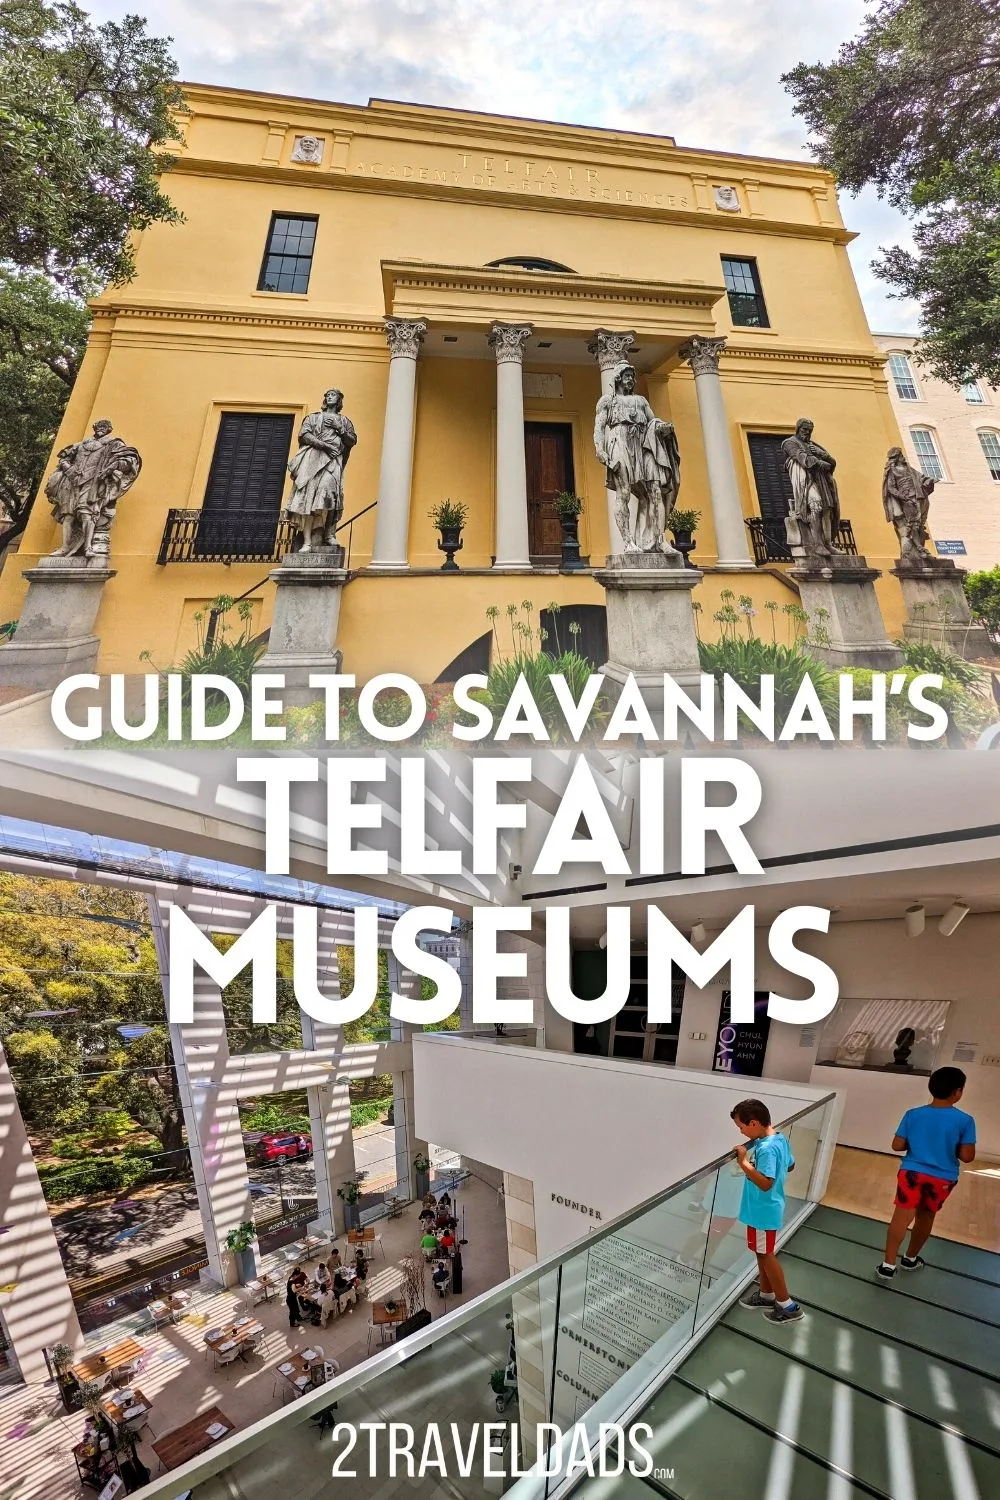 Savannah's Telfair Museums are a great addition to your visit. From historic art and contemporary exhibitions to the iconic Bird Girl, see what the Telfair Academy and Jepson Center have to offer.